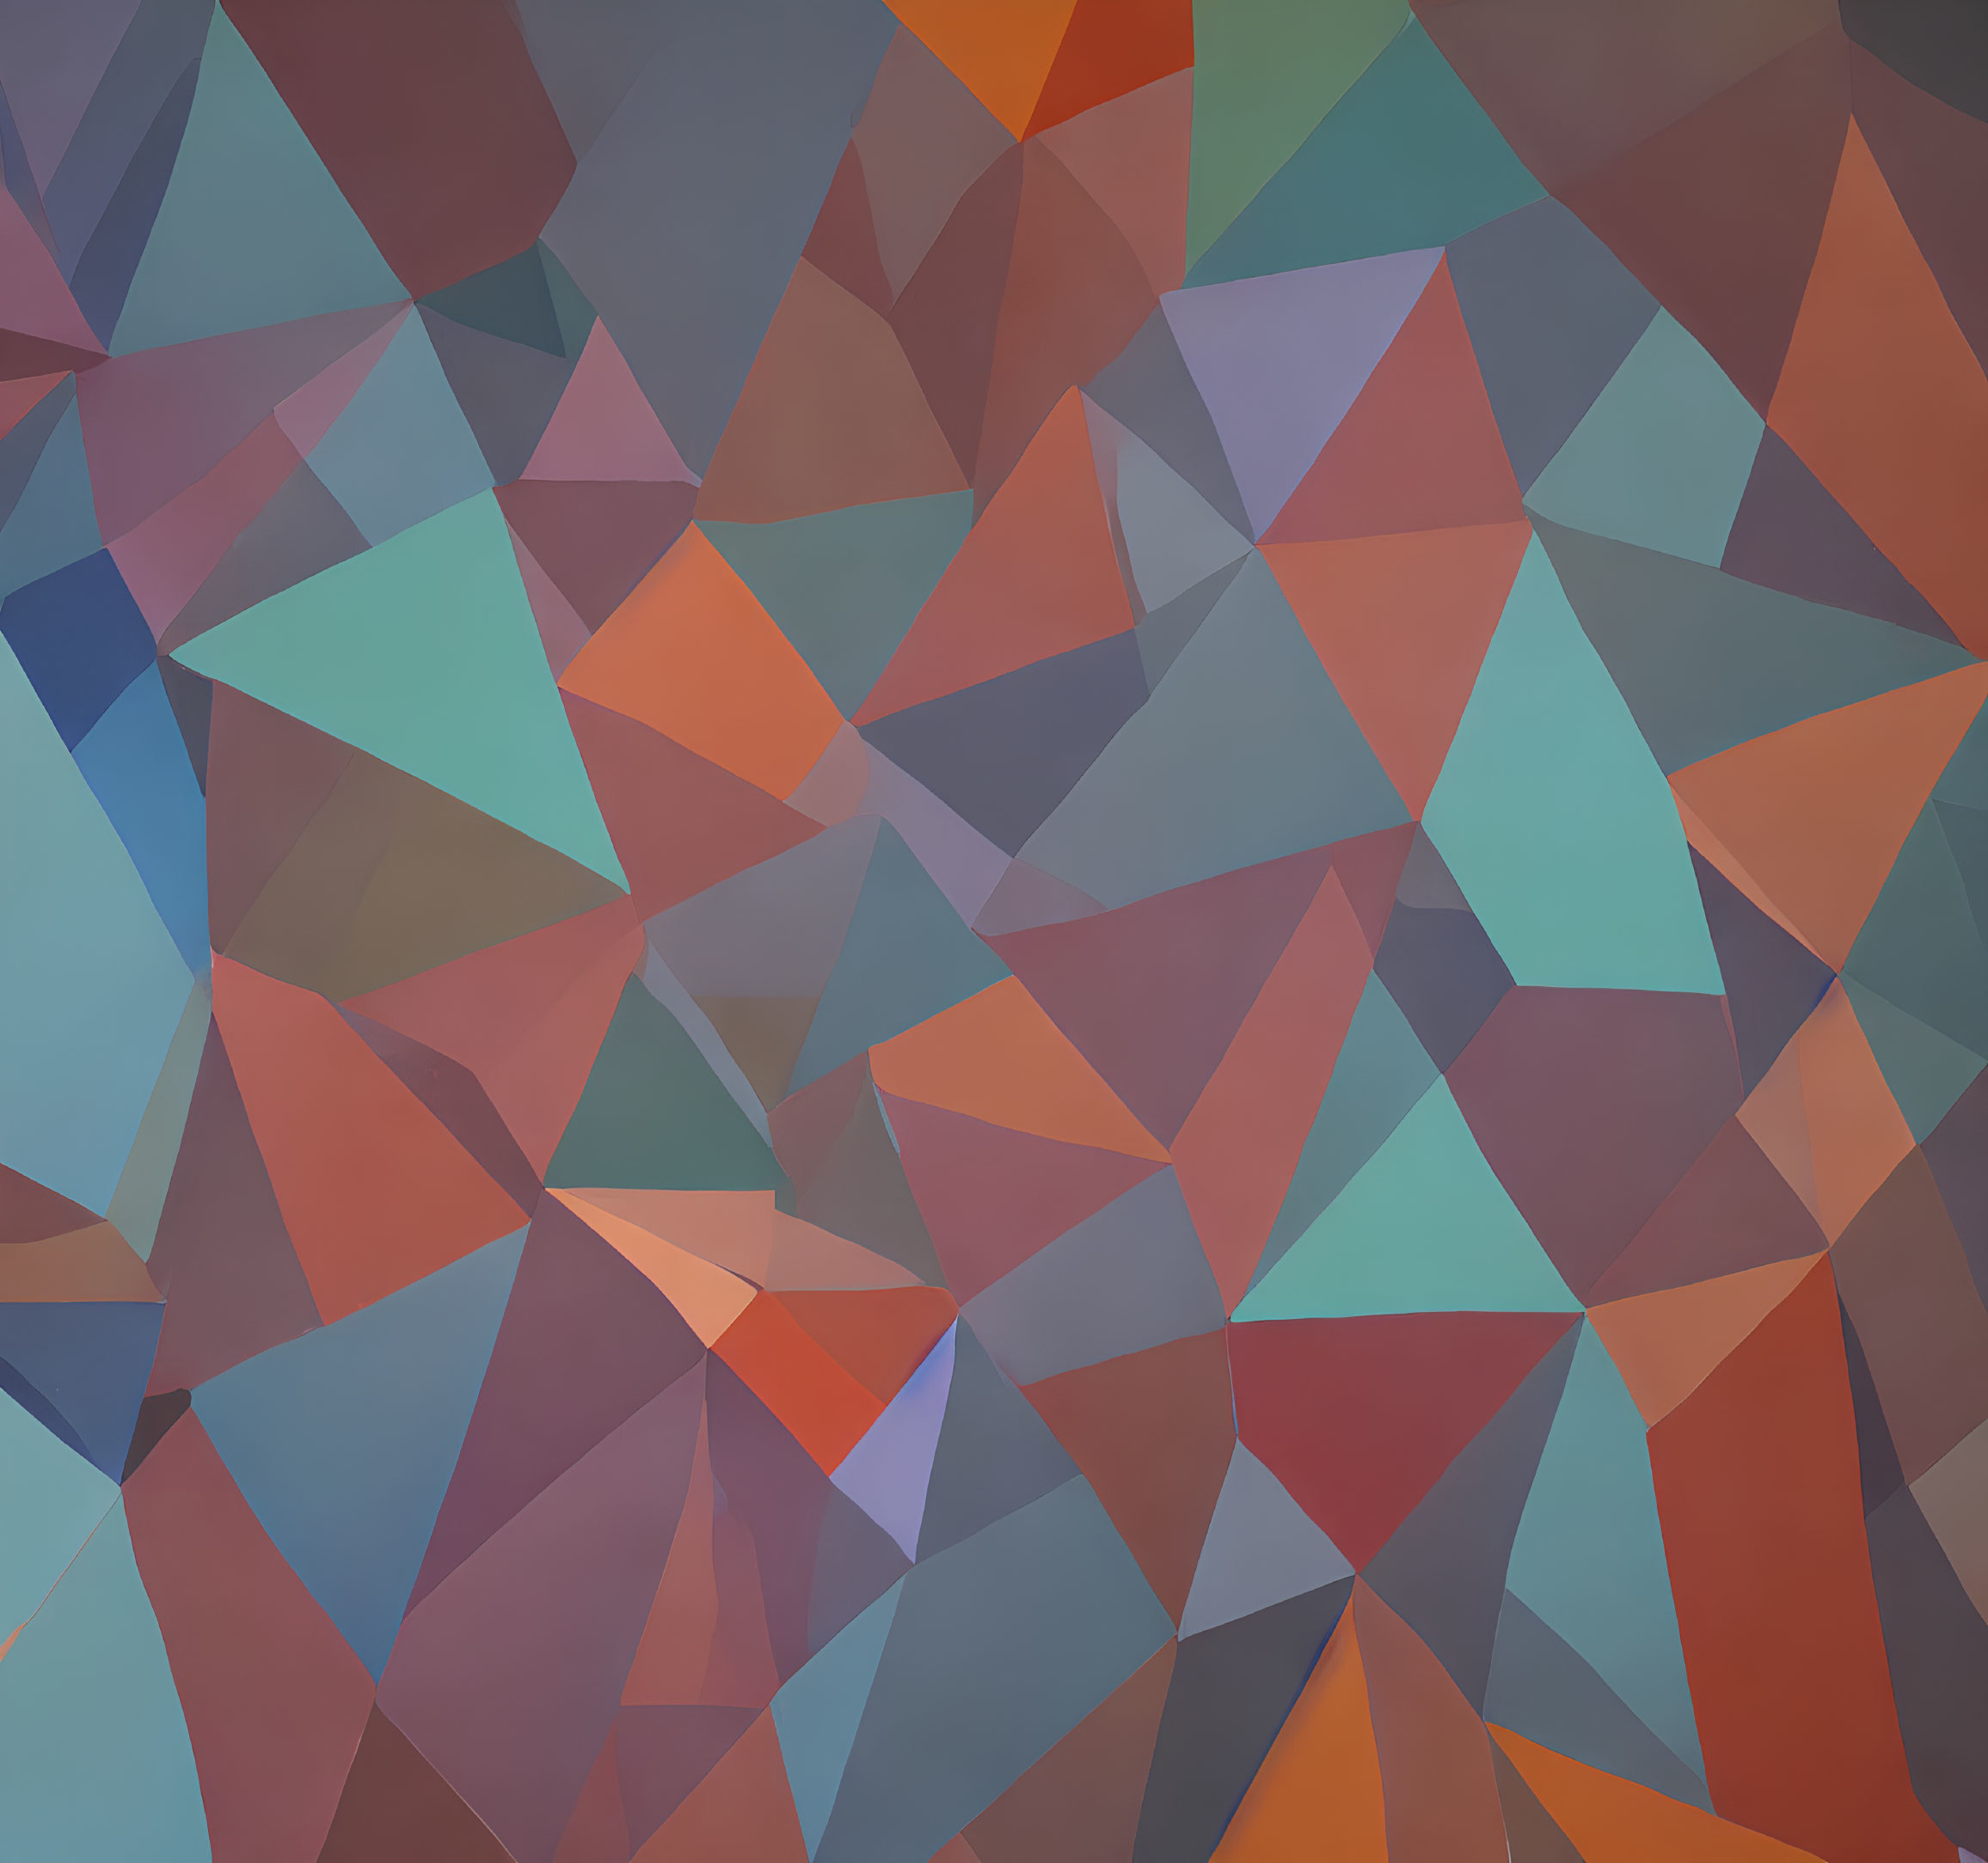 Colorful geometric abstract composition with blue, red, and brown triangles